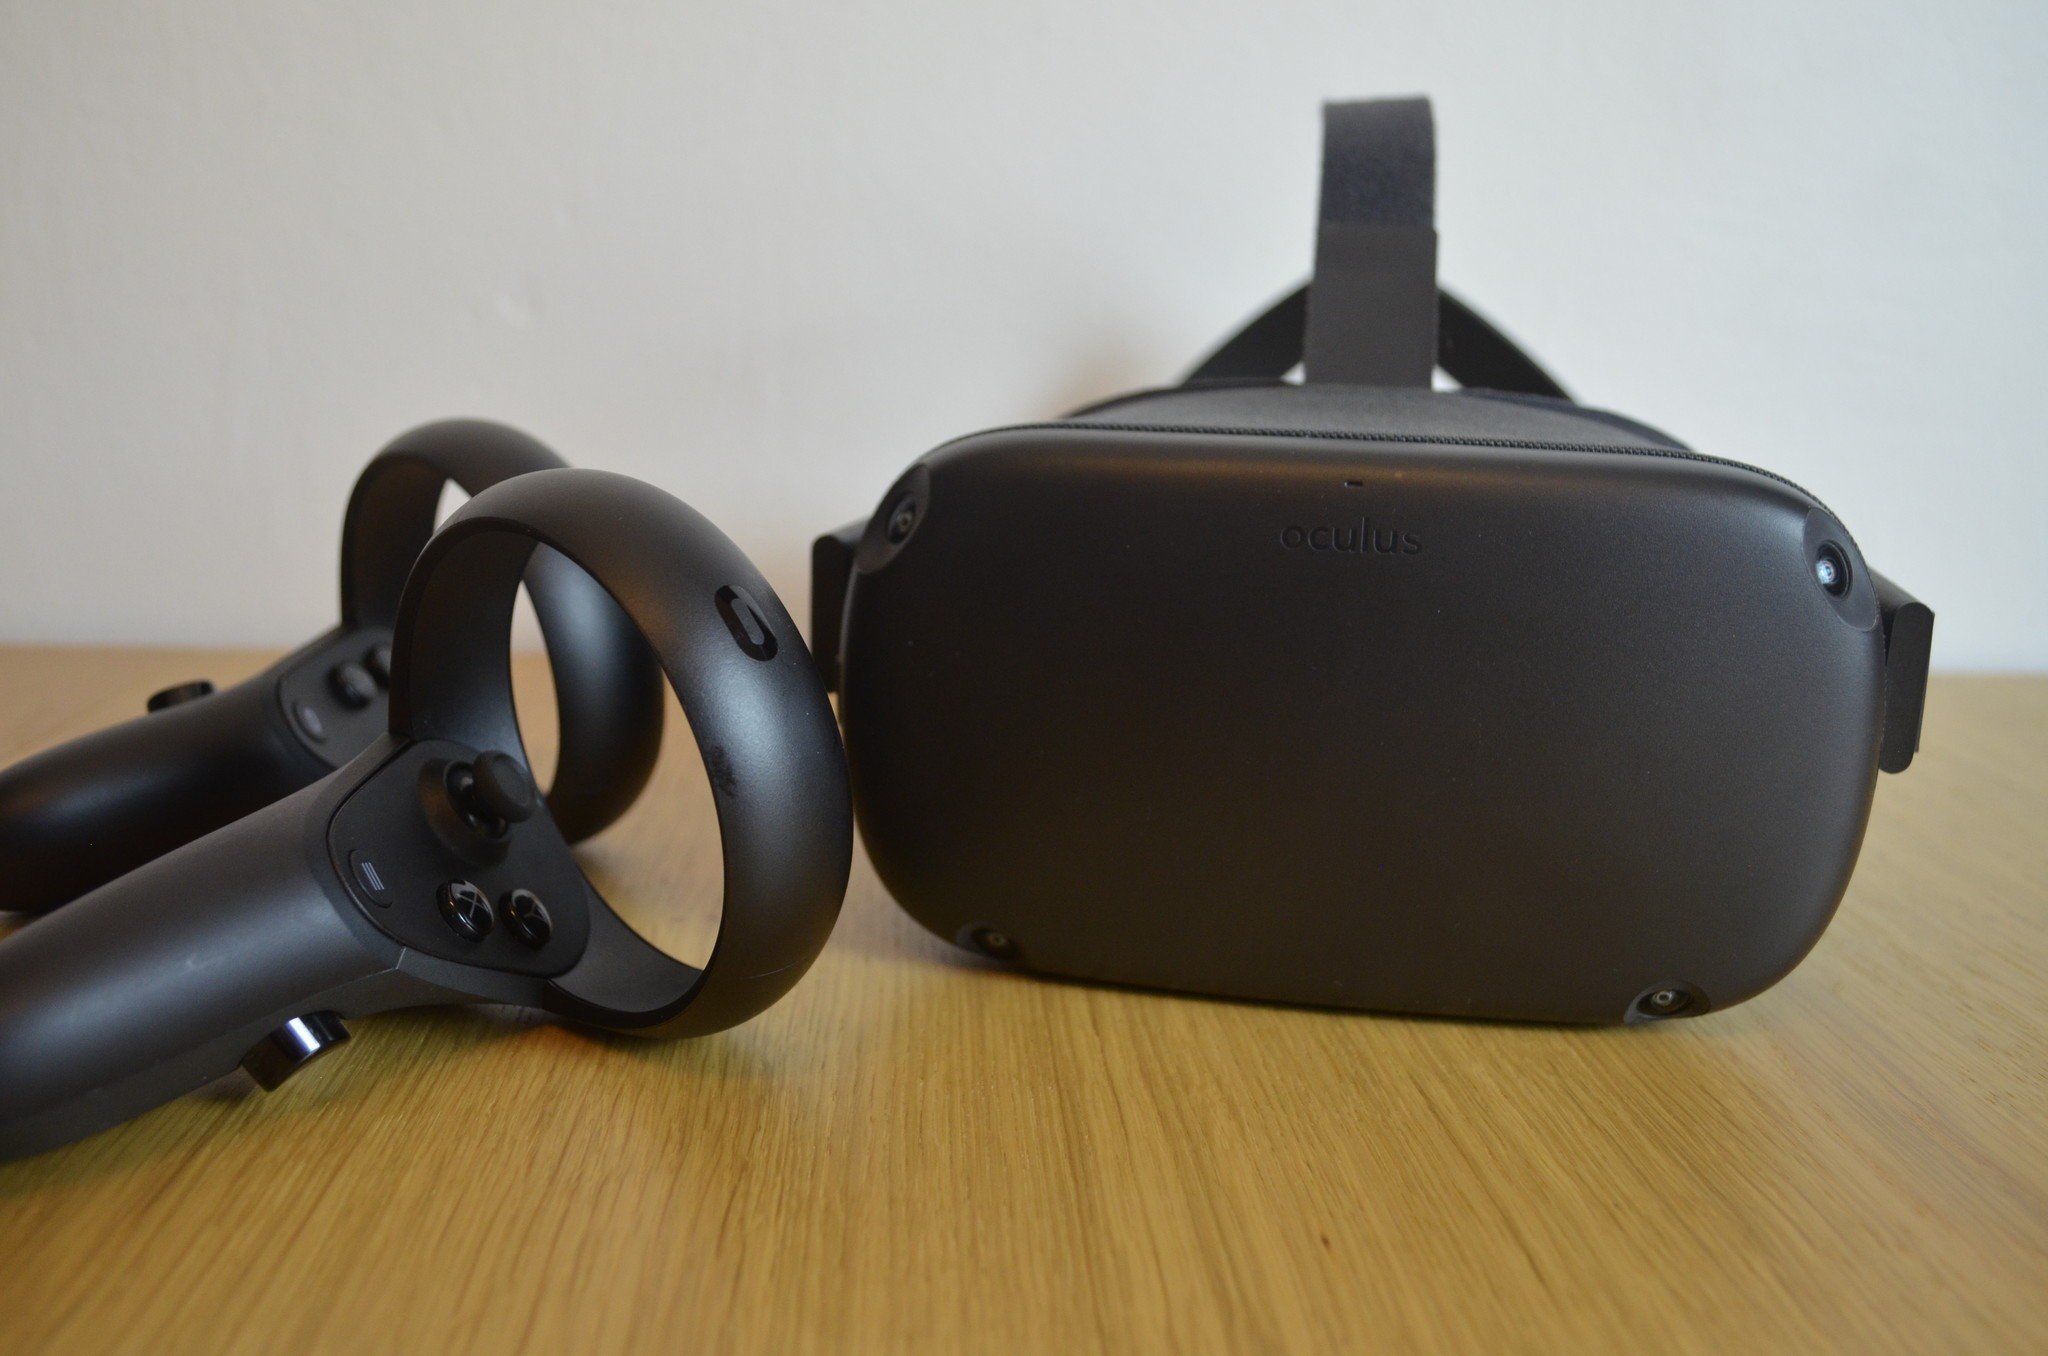 Does casting Oculus Quest games reduce battery life?